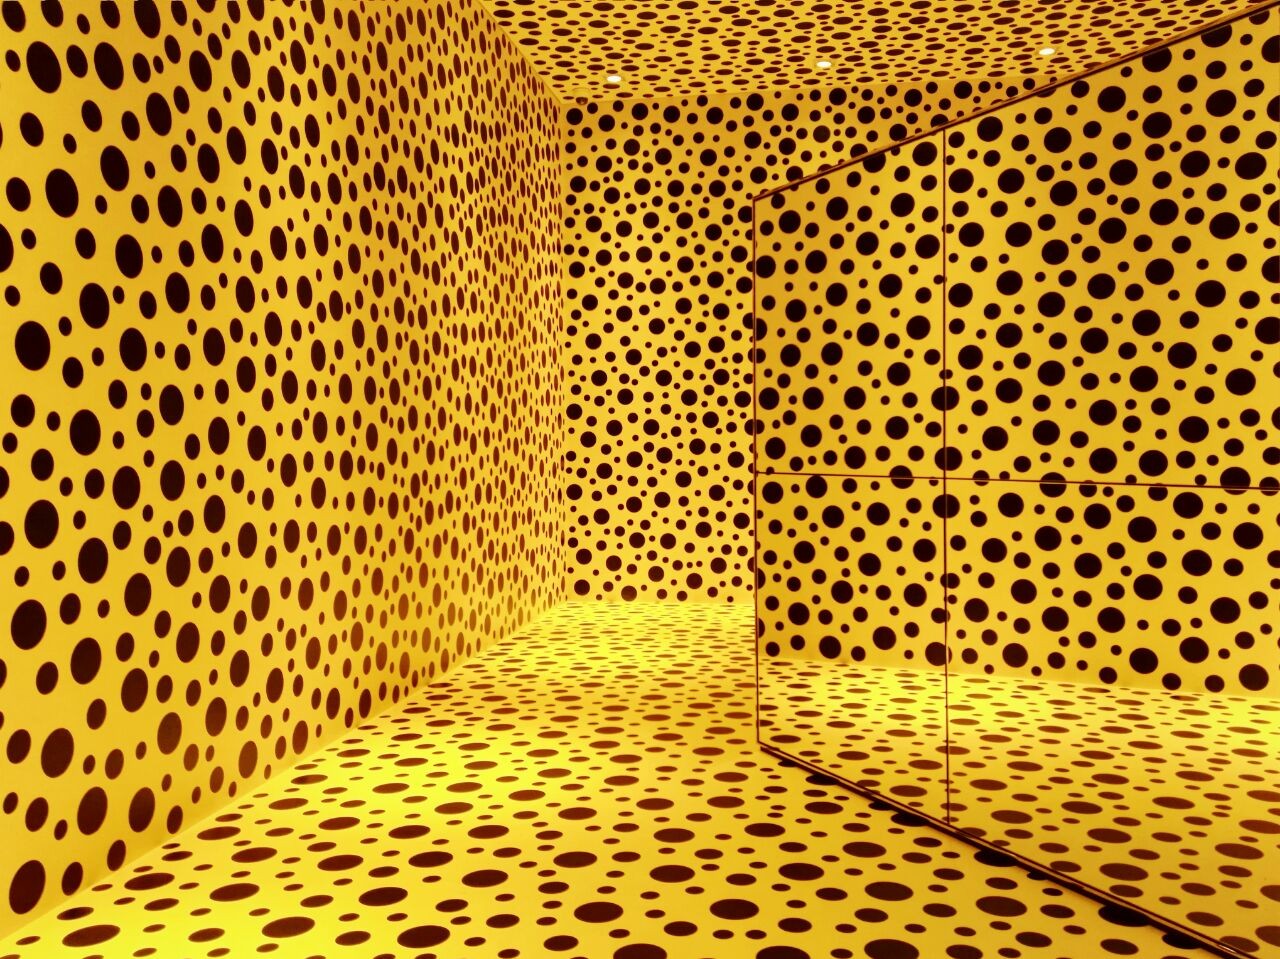 There's now a Yayoi Kusama robot in Tokyo